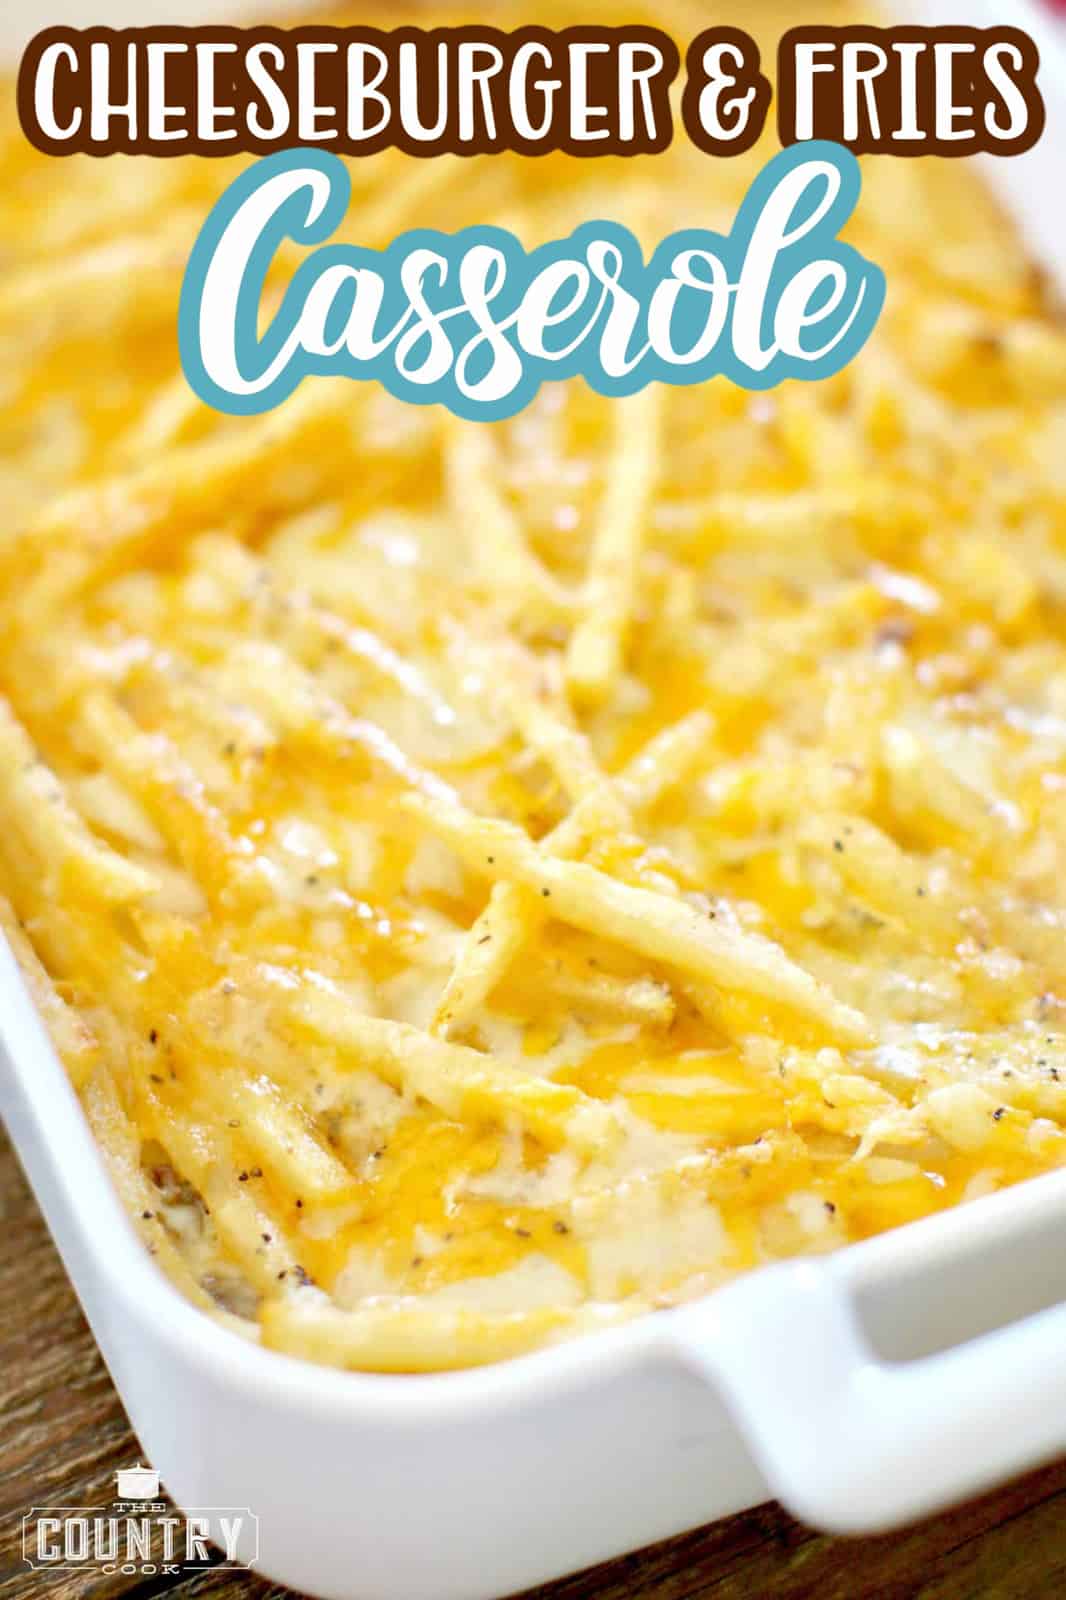 Cheeseburger and Fries Casserole recipe from The Country Cook. Fully cooked casserole shown with fries and melted cheese.